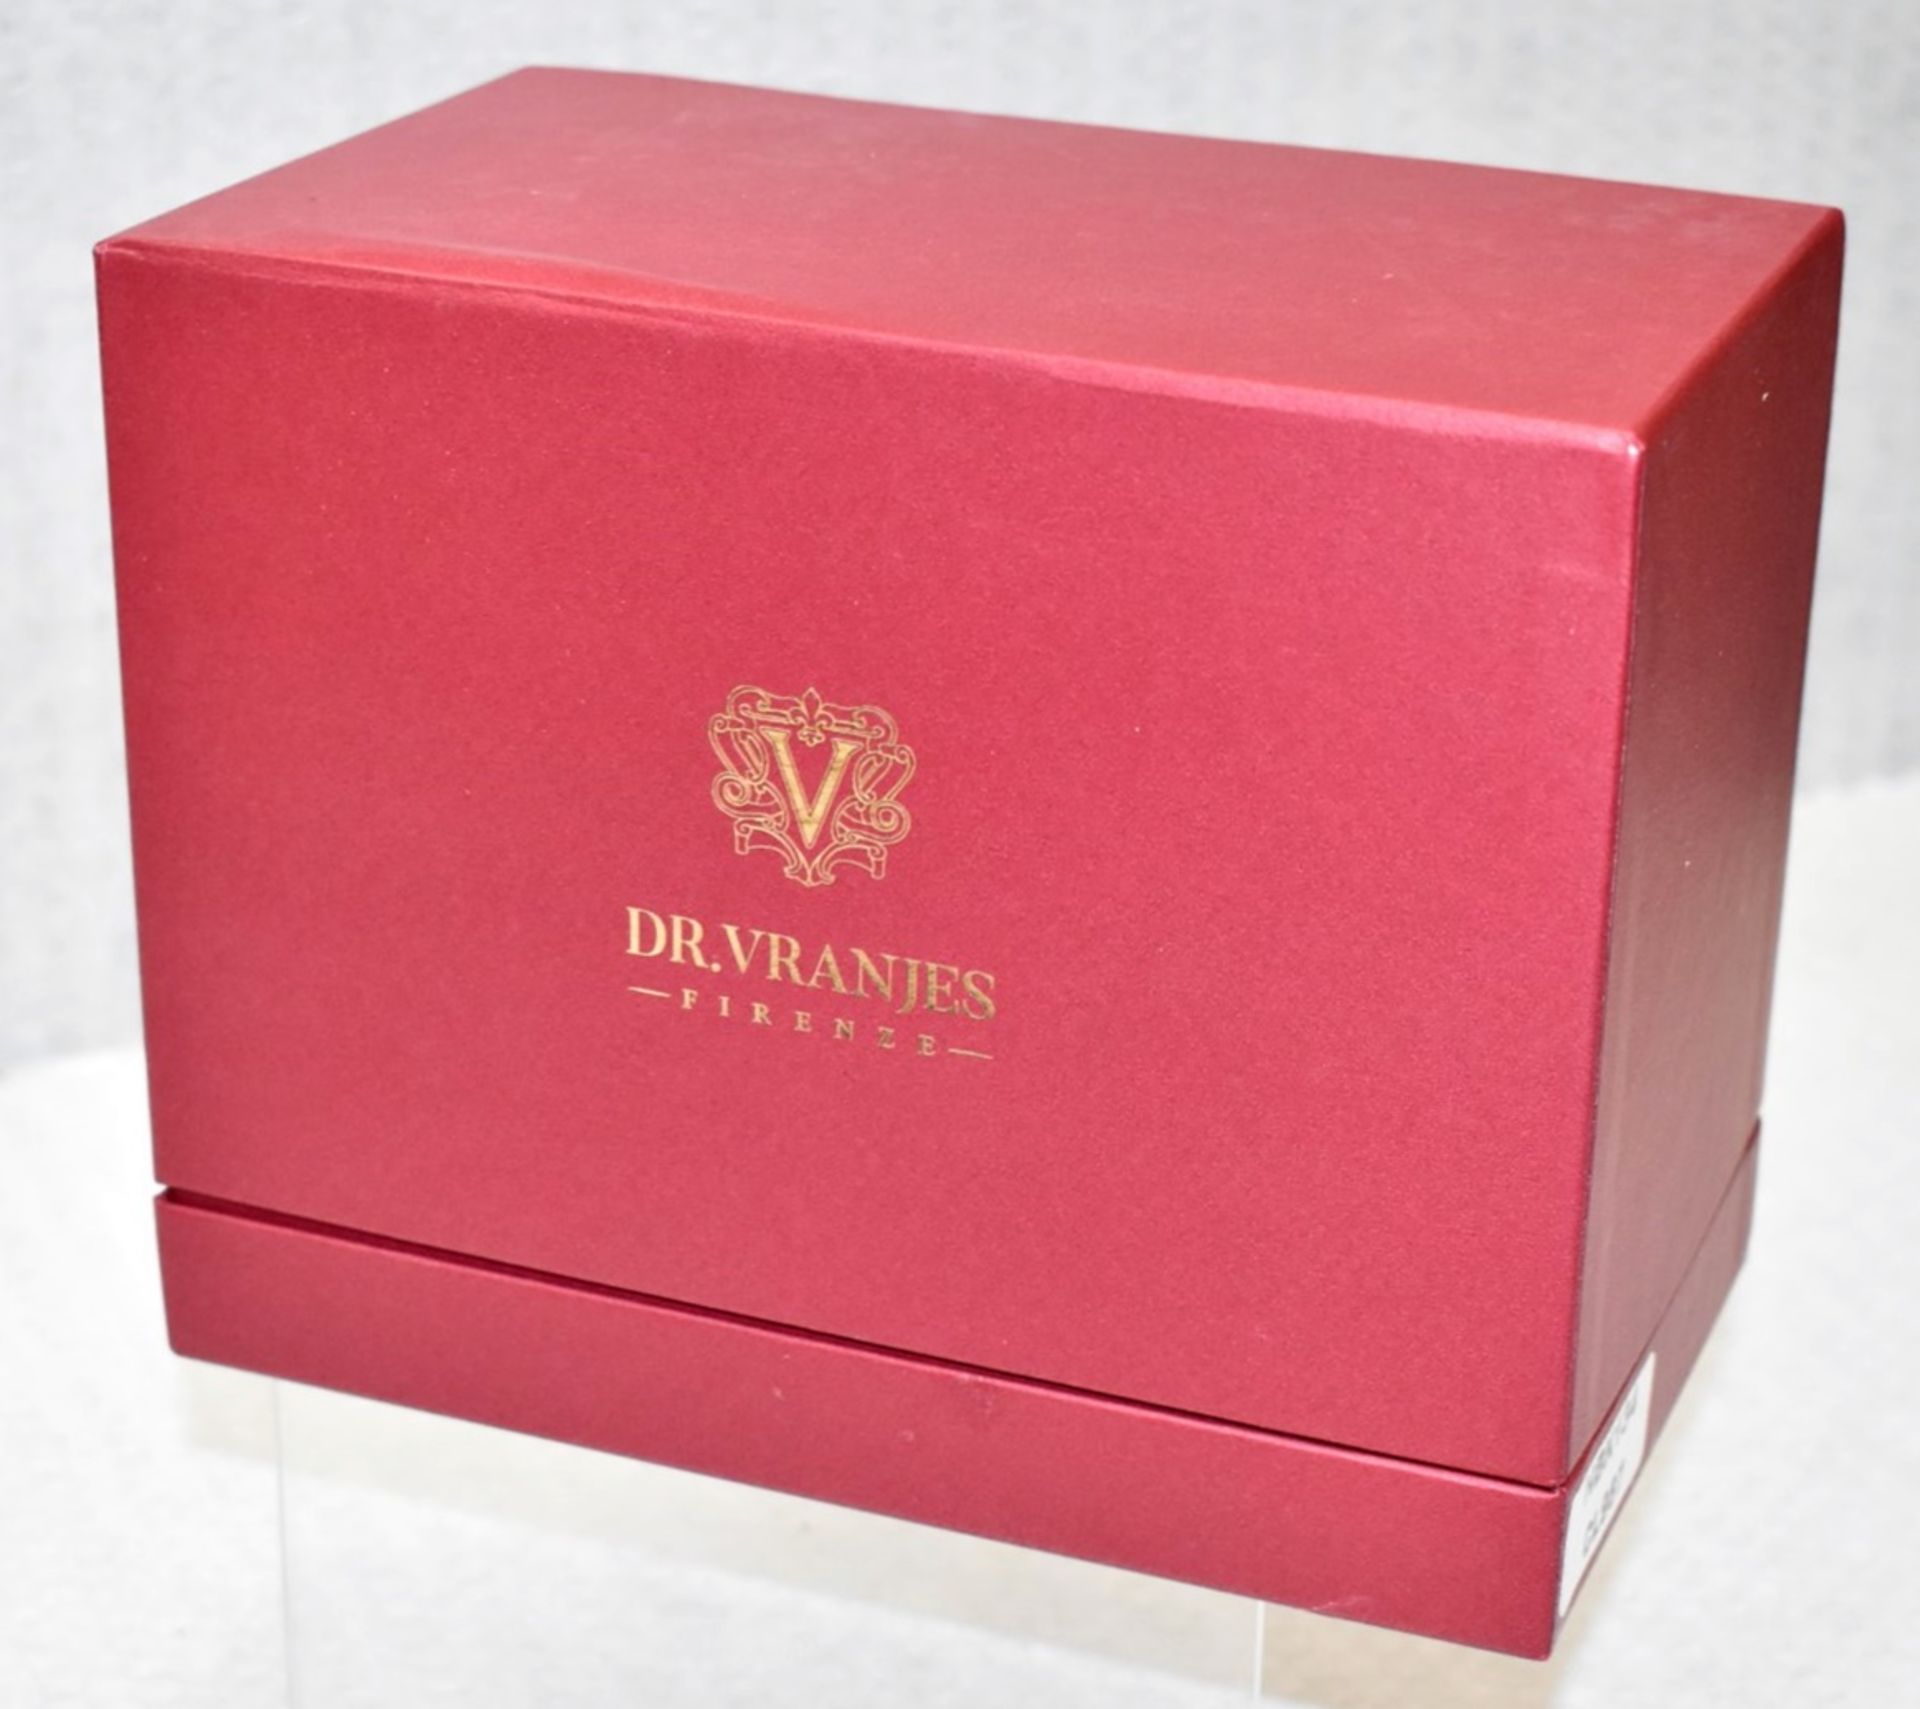 1 x DR. VRANJES FIRENZE 250ml Rosso Nobile Fragrance with Gift Box - Image 5 of 6